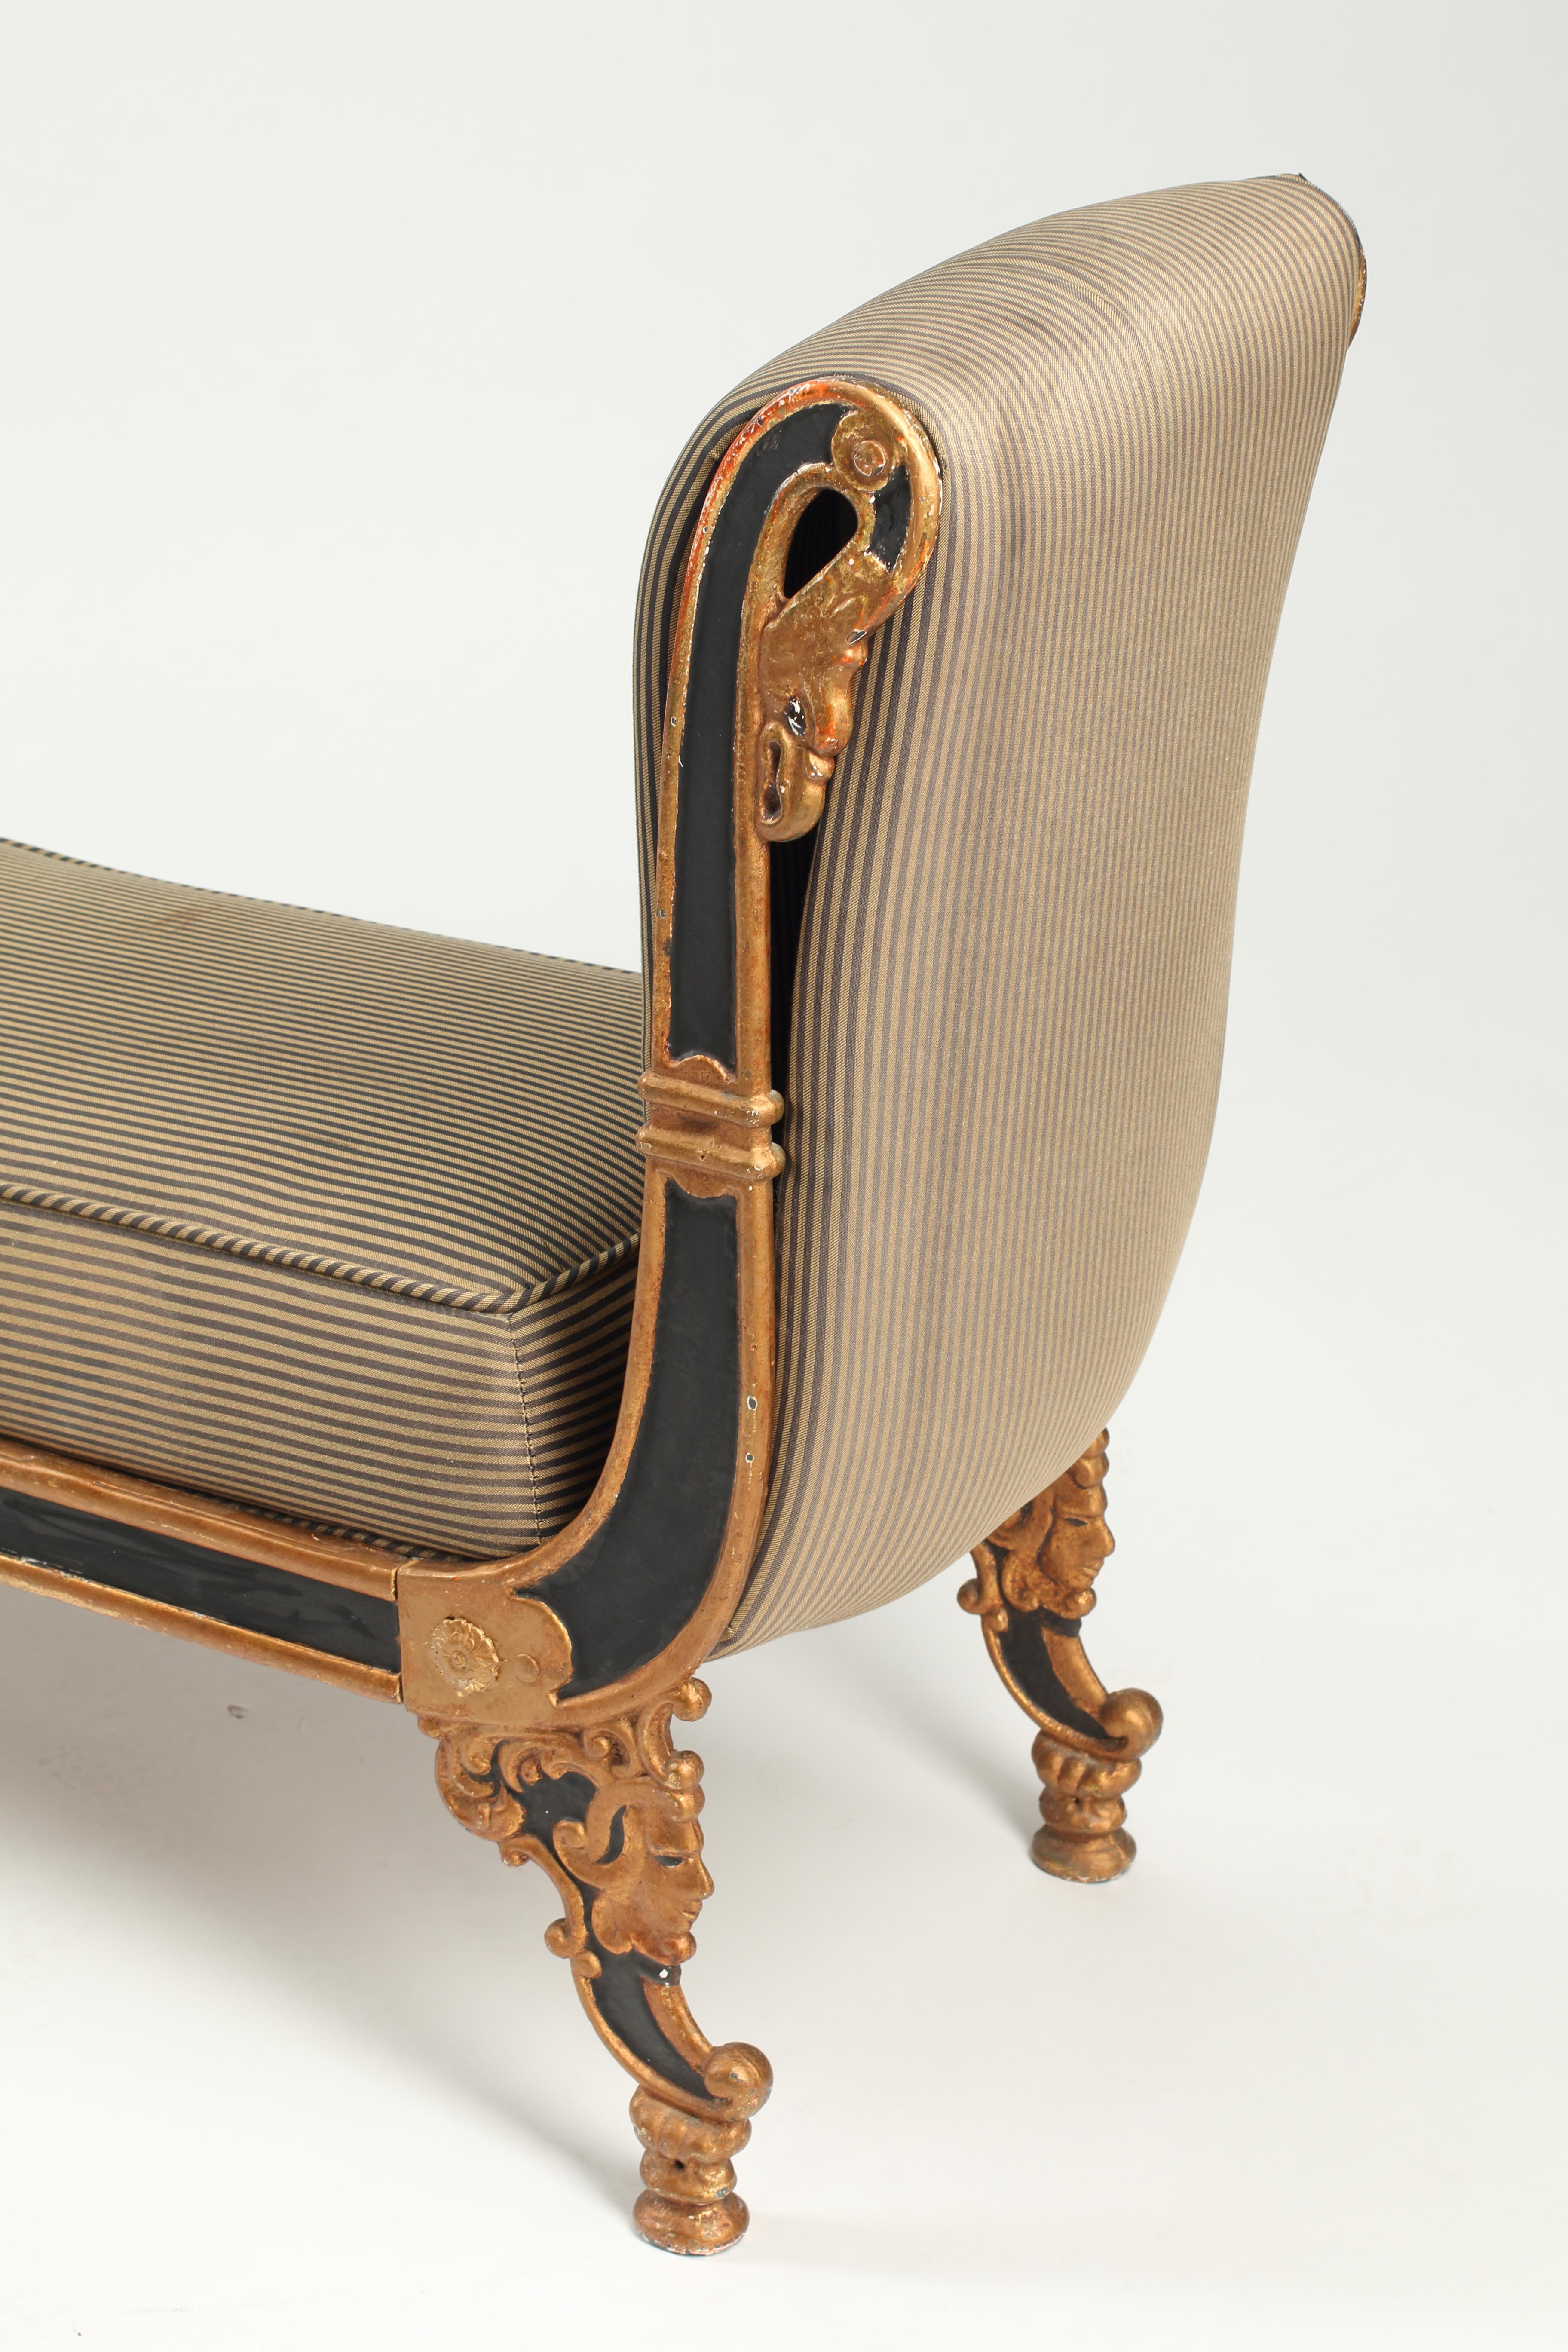 A highly decorative and unique 19th century French empire painted and parcel gilt cast iron upholstered bench.
Parcel gilt border is of a rich gold with warm red undertone painting jester faces, curves and rosettes. 
Upholstered with elegant and